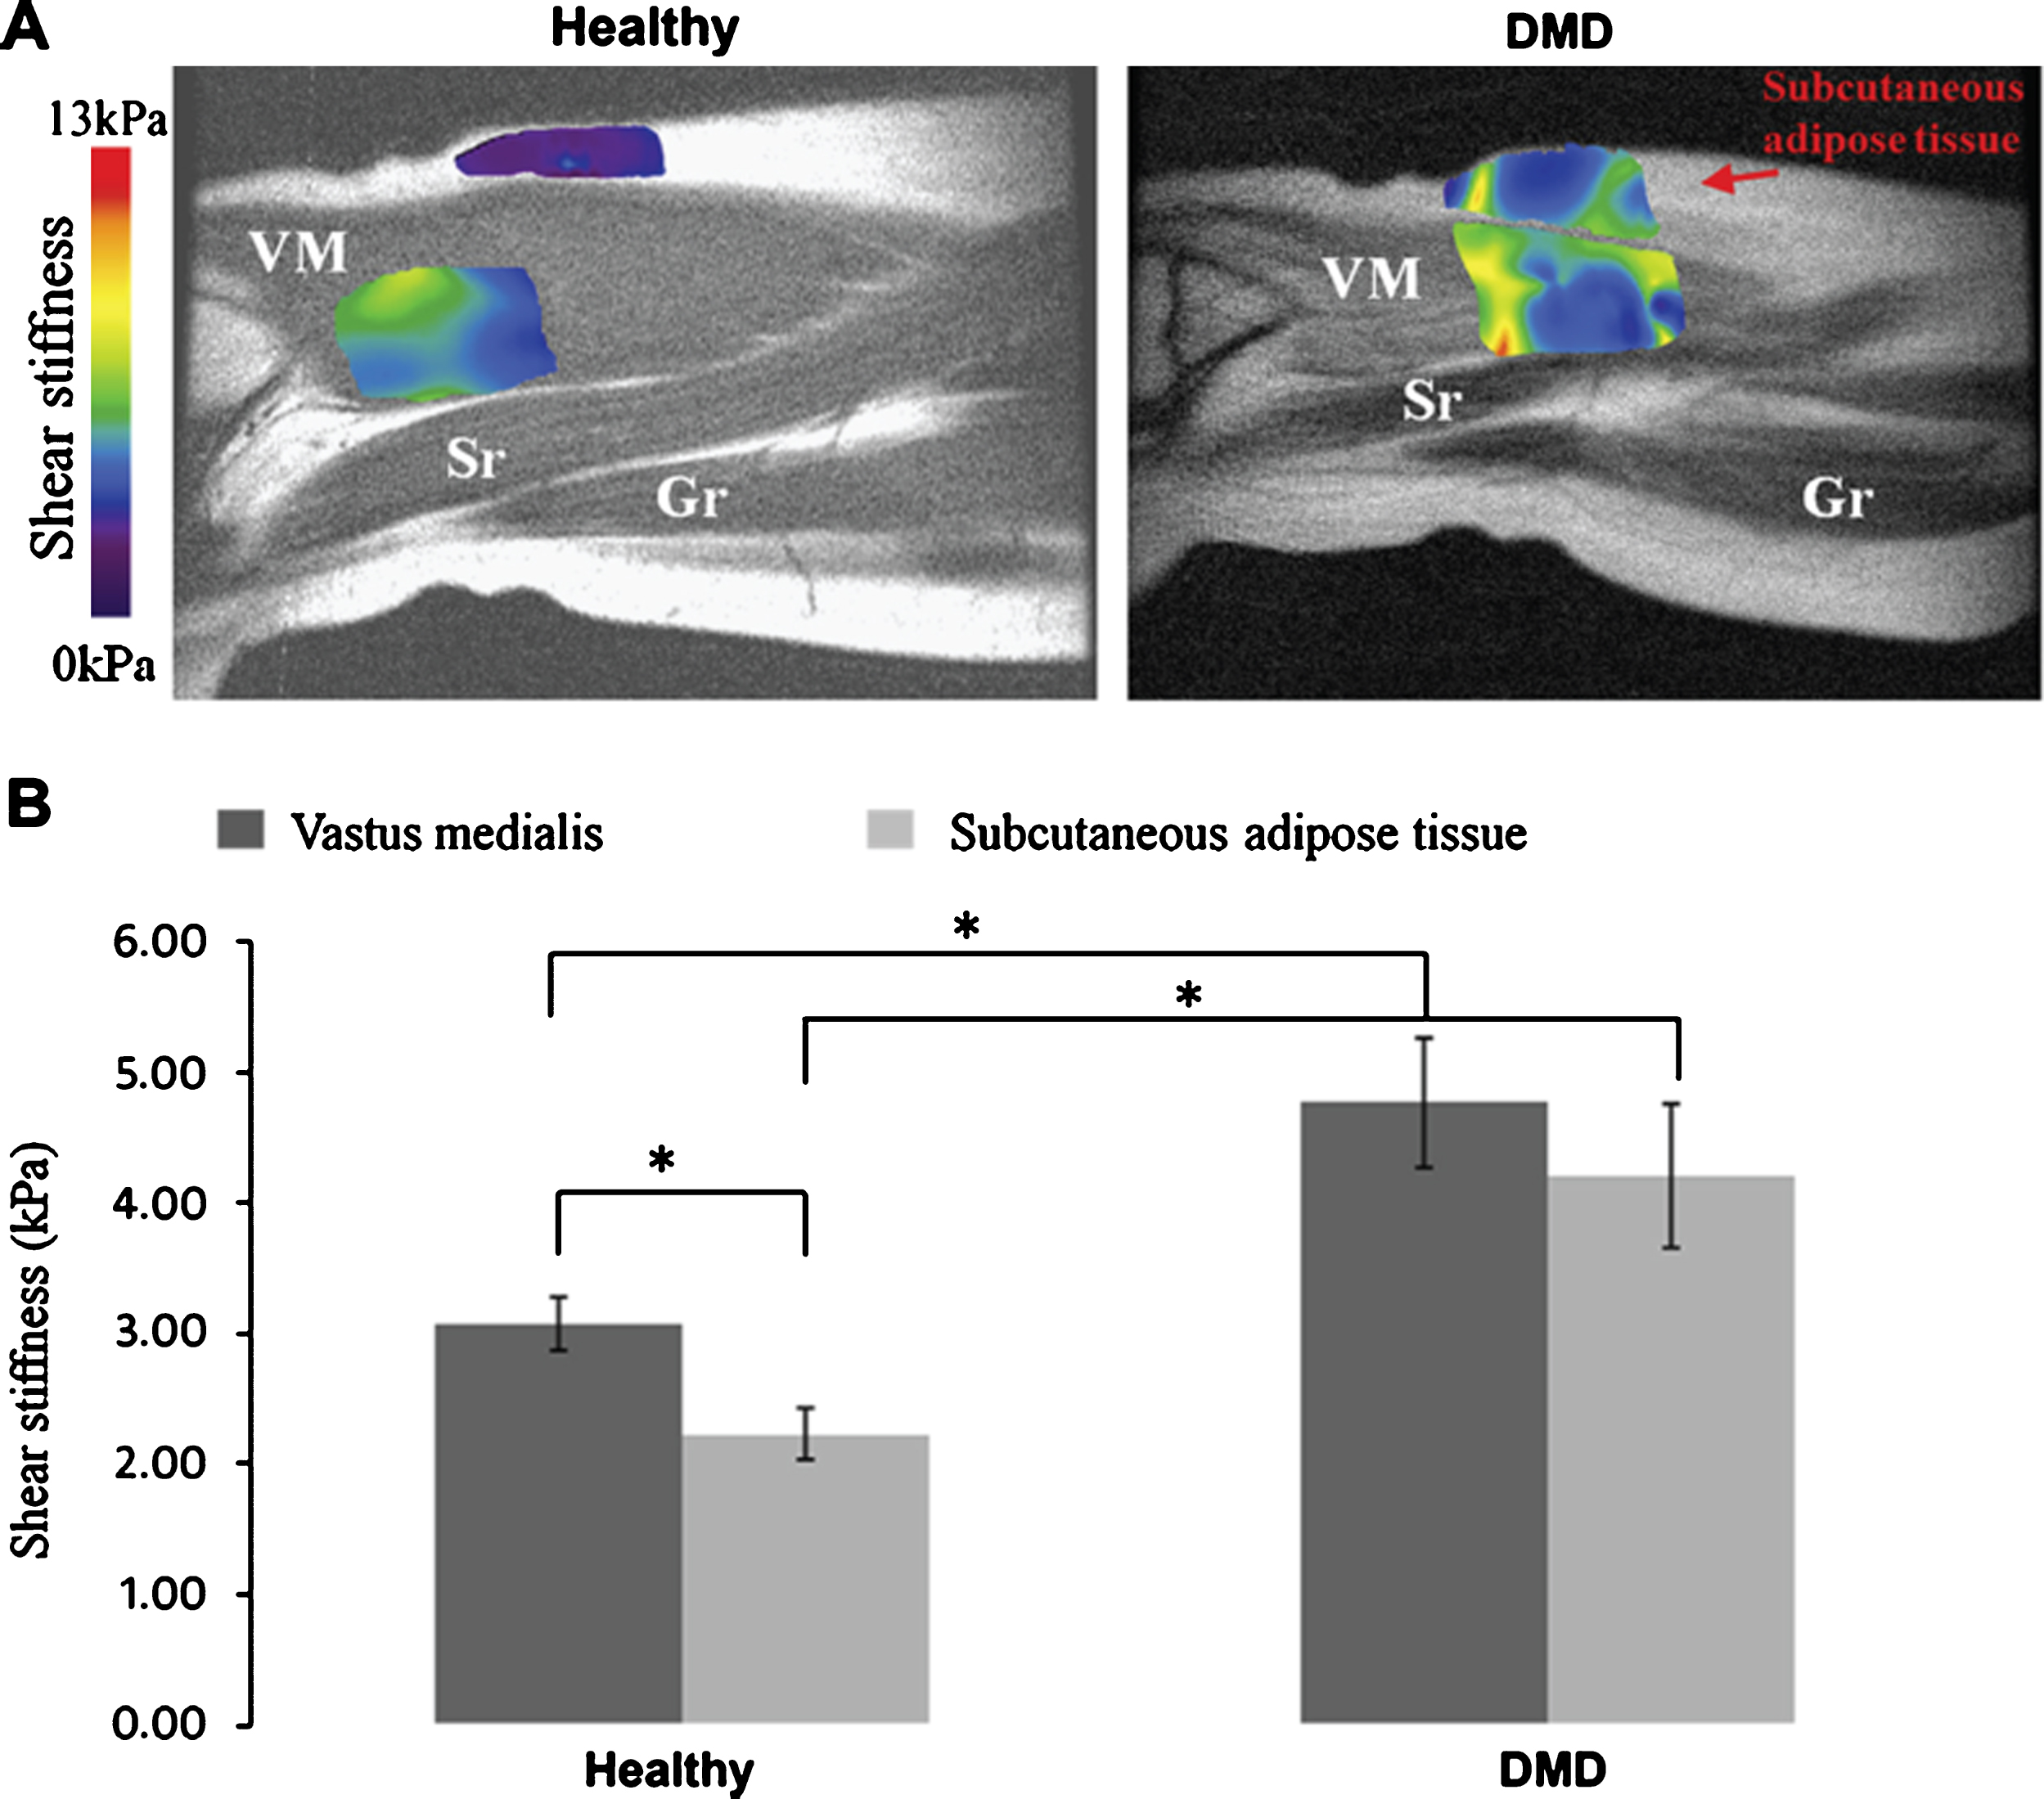 Biomechanical characterization of skeletal muscle in DMD children. (A) MR Elastography derived sheer stiffness color maps projected on parts of the legs of a healthy subject and a child with DMD. VM = vastus medialis, Sr = sartorius, Gr = gracilis. (B) Quantification of the shear stiffness in the vastus medialis and the subcutaneous adipose tissue (* = P < 0.1). Figure reproduced with permission from Ref. [100].